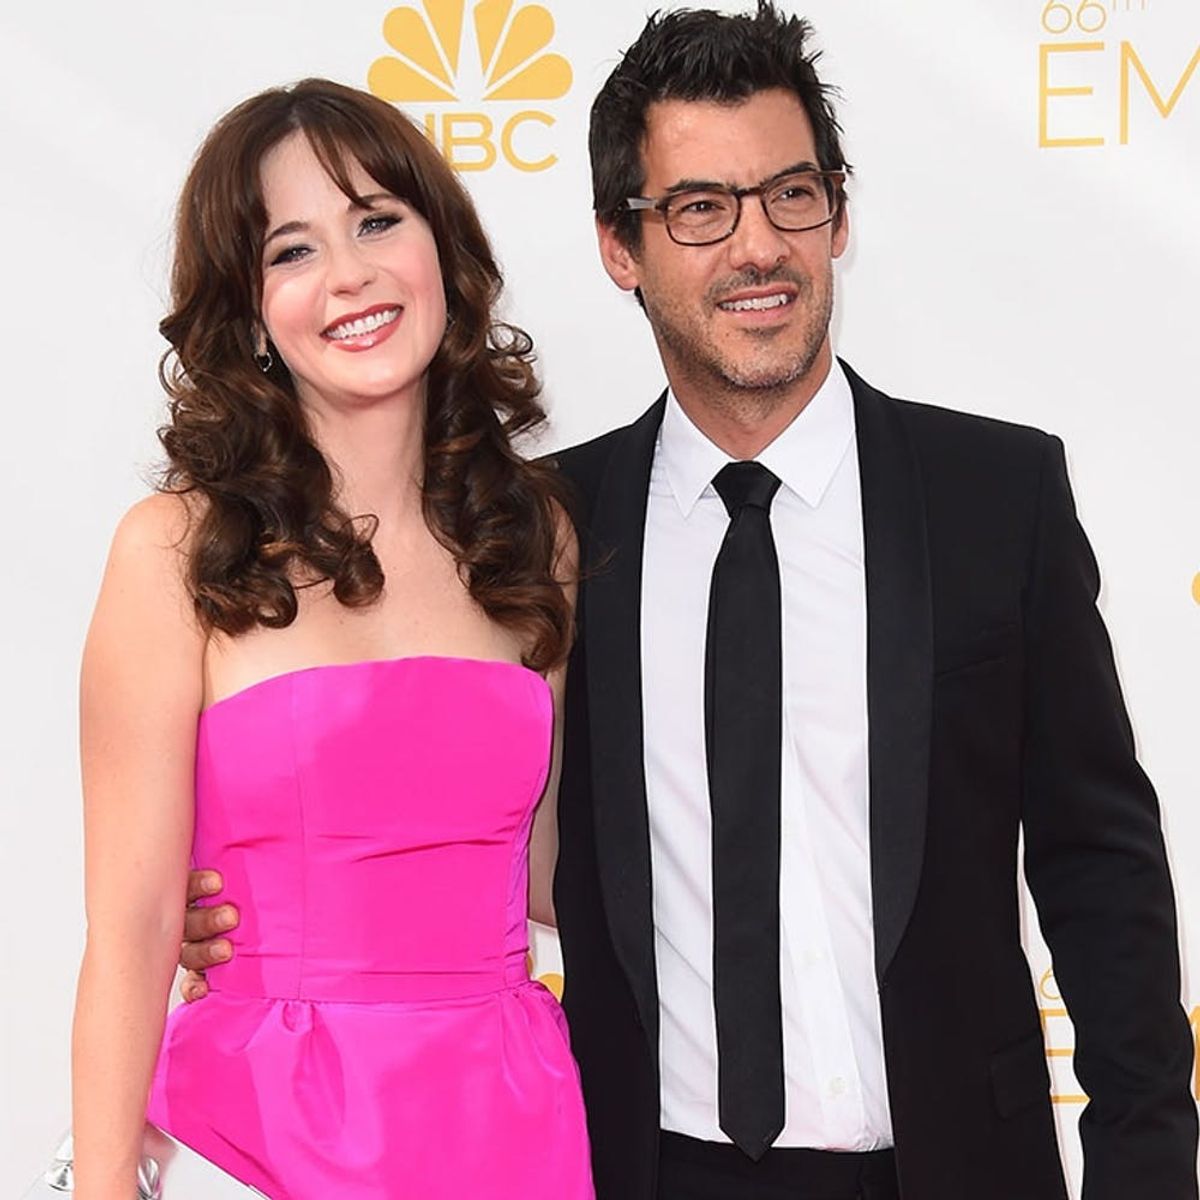 Zooey Deschanel Is the Latest Celeb on Baby Bump Watch